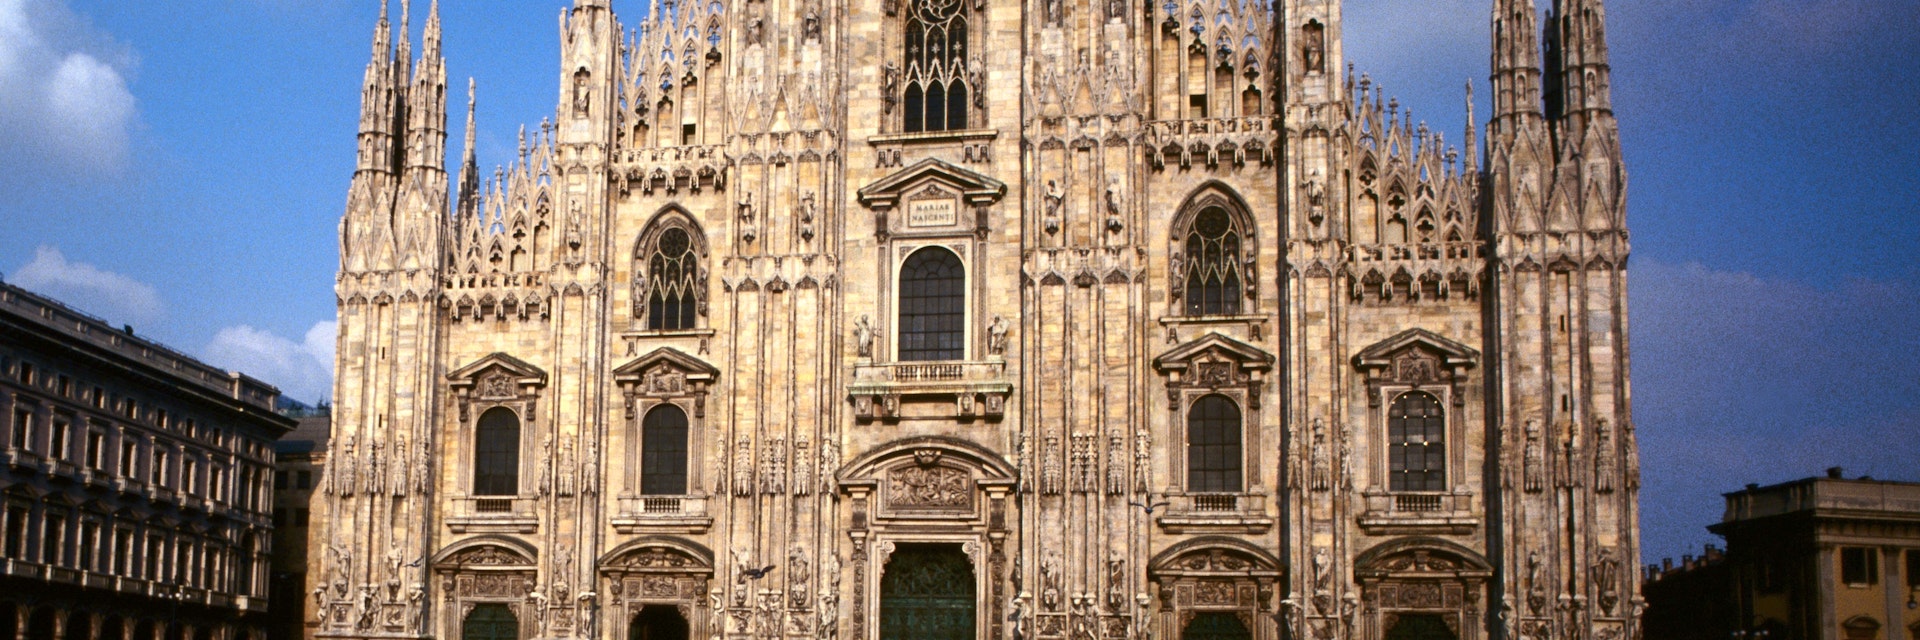 Facade of The Duomo ( Cathedral ) - Milano, Lombardy